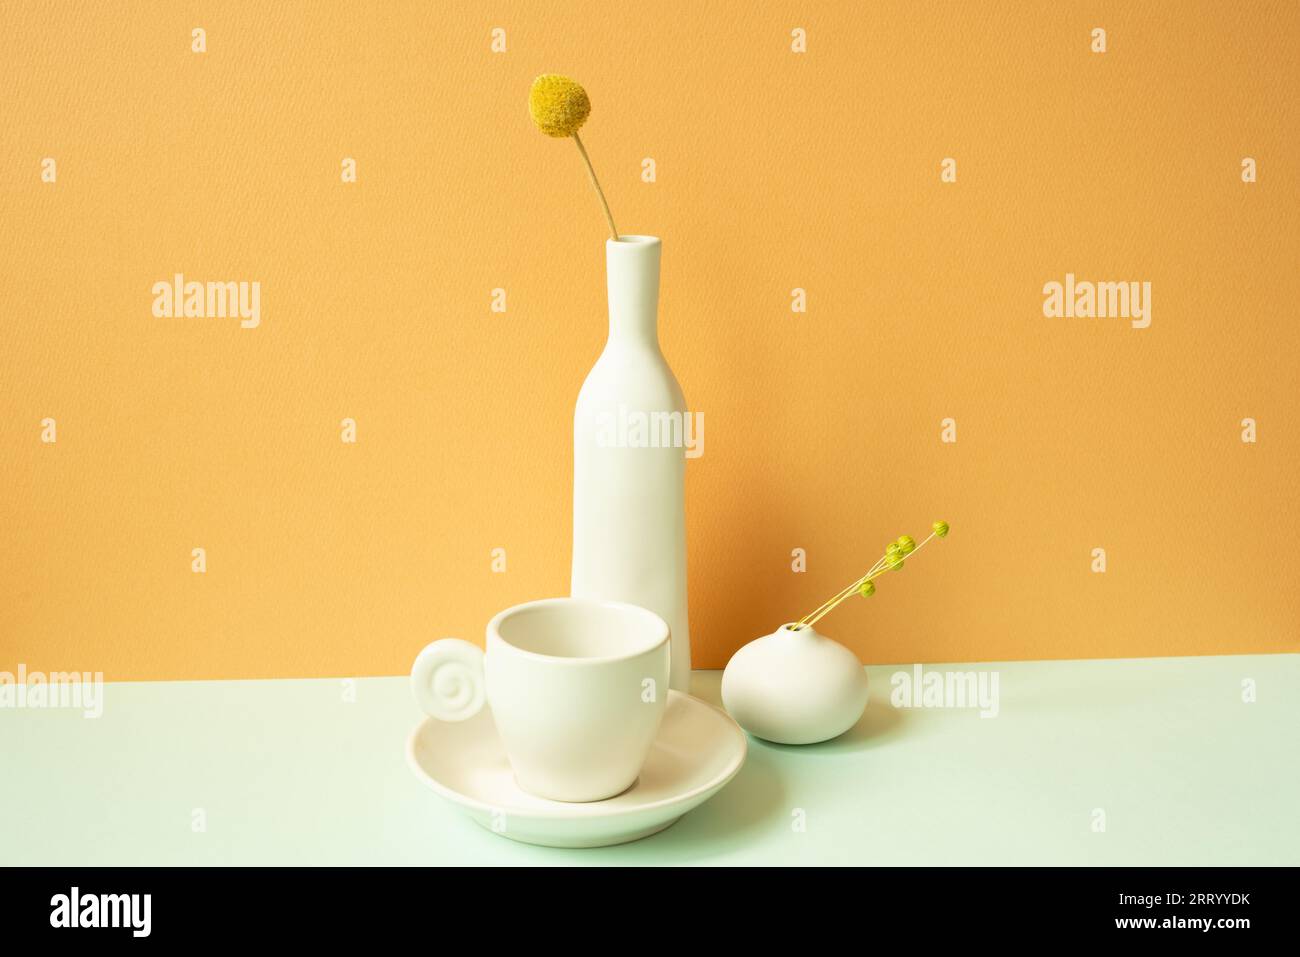 Minimal white ceramic coffee cup and vase of flower on mint green table. orange wall background Stock Photo